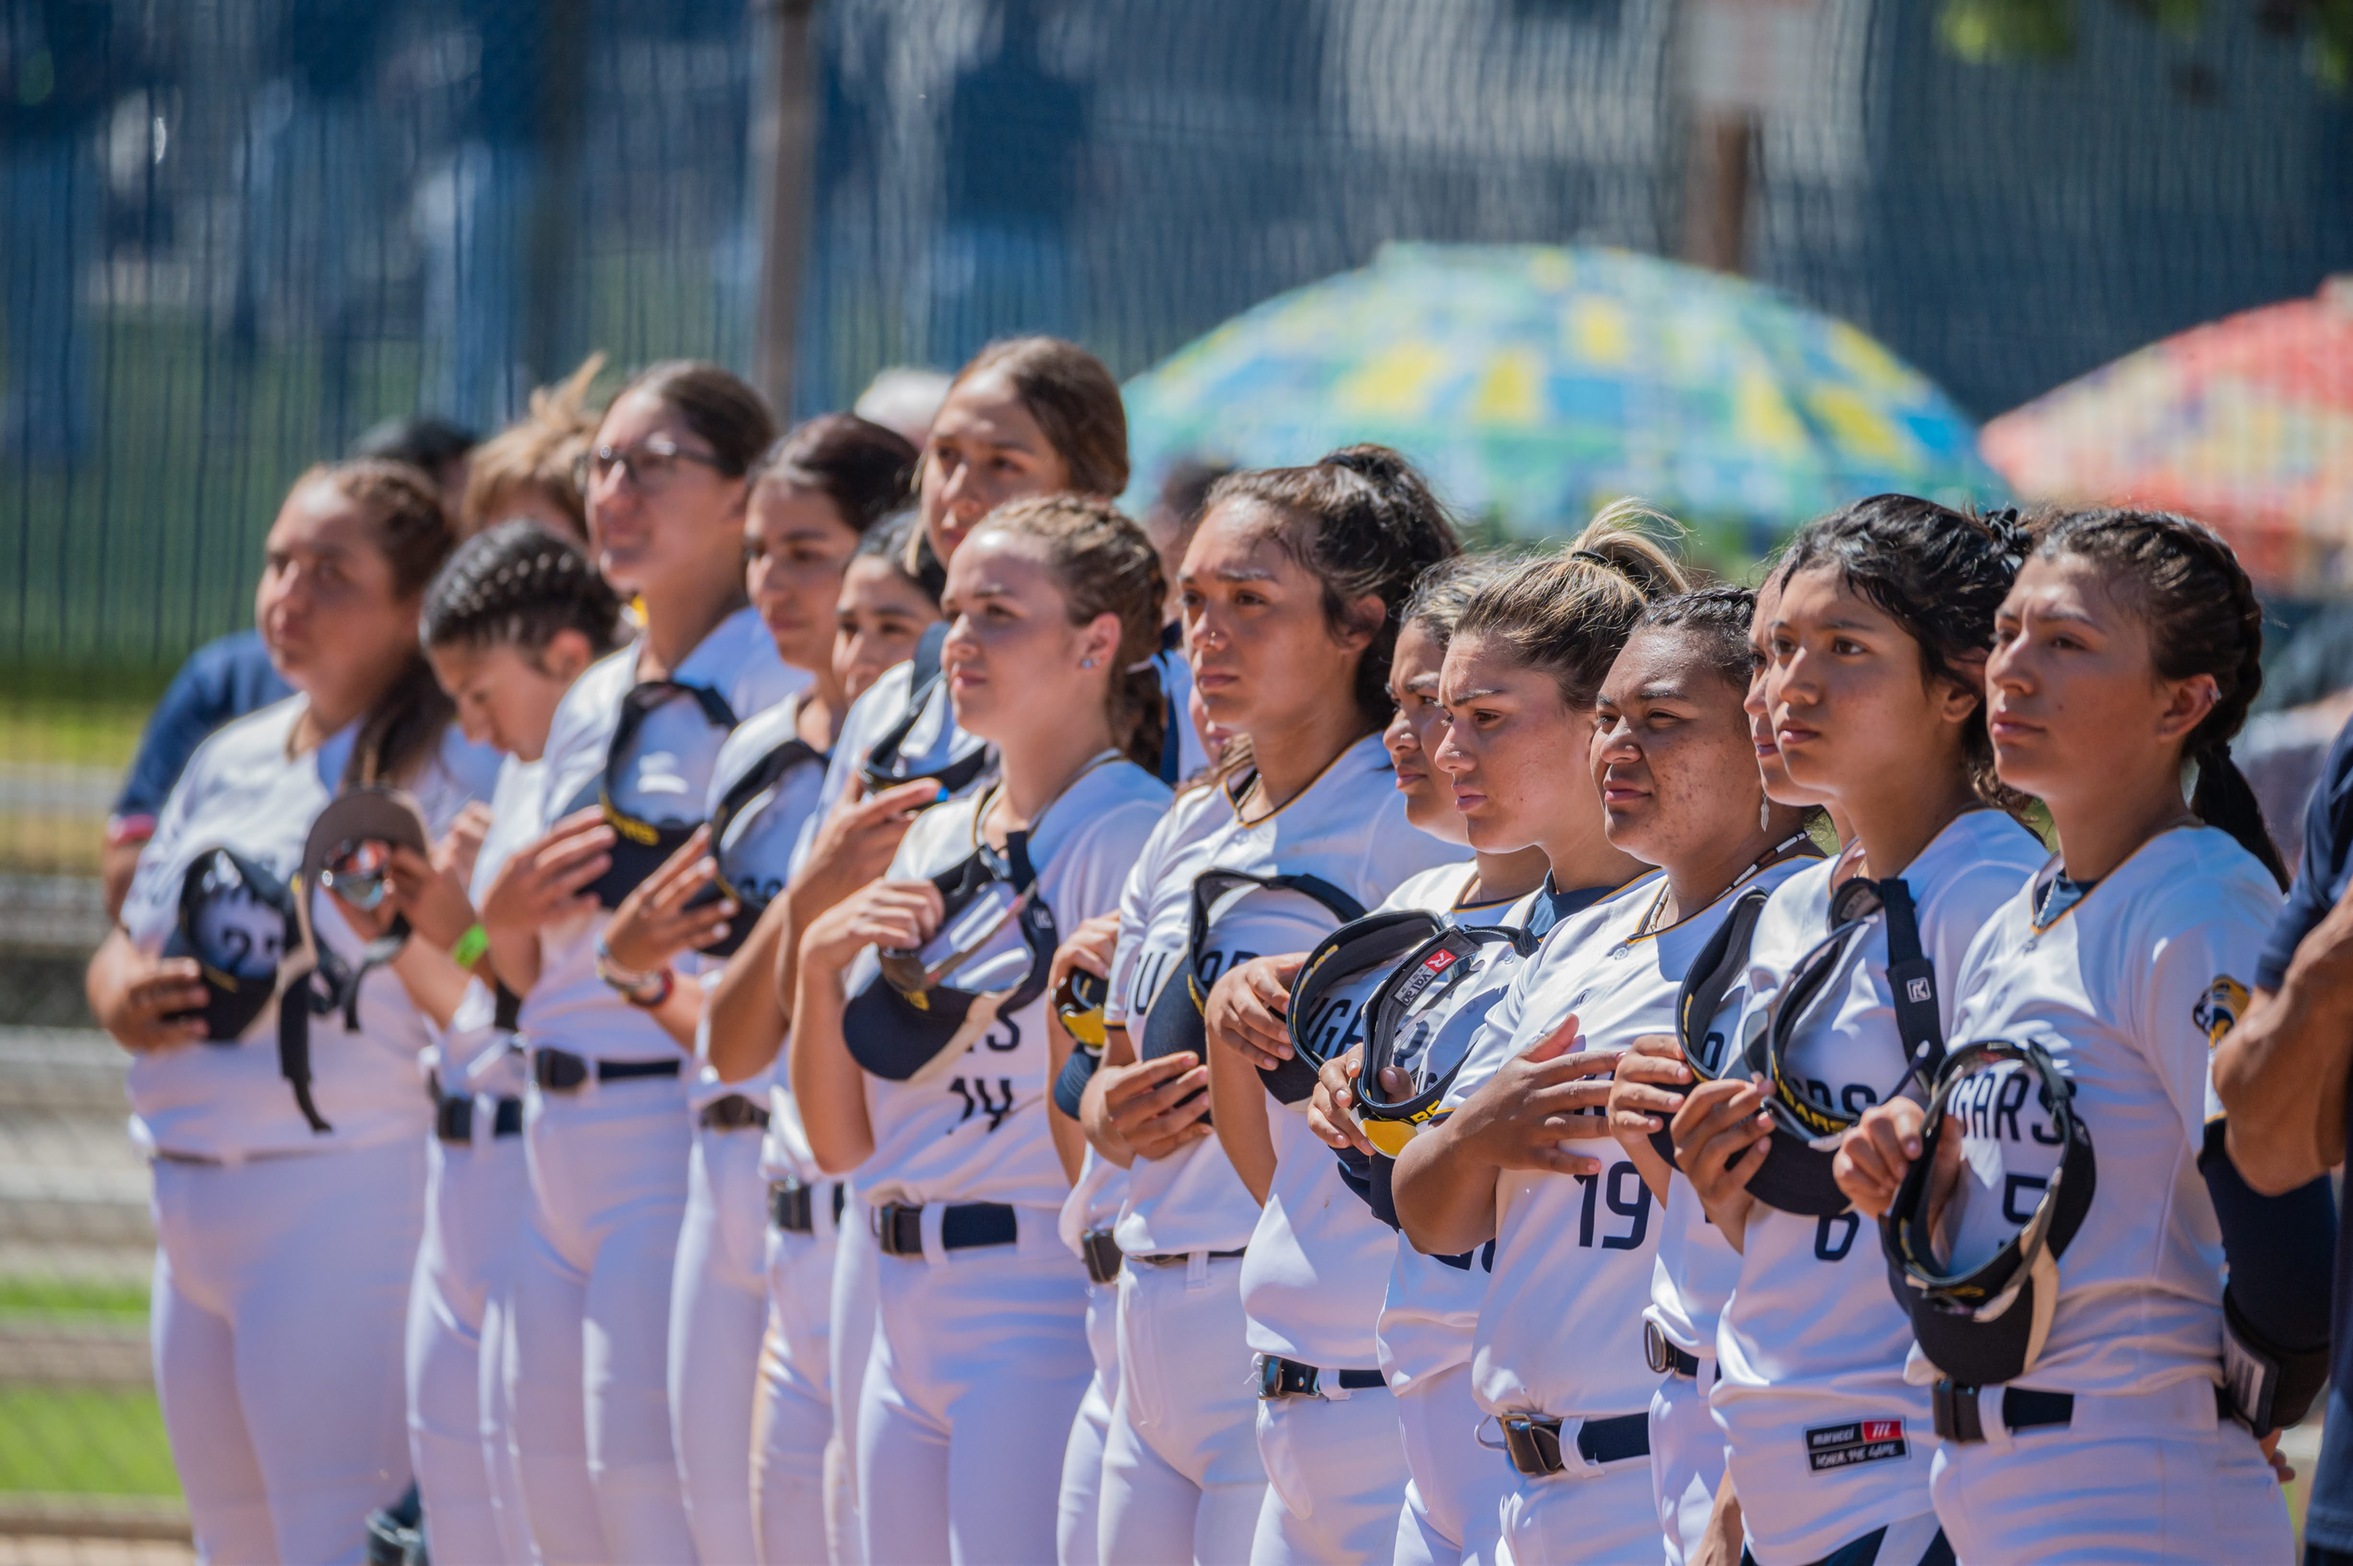 College of the Canyons softball stock image.